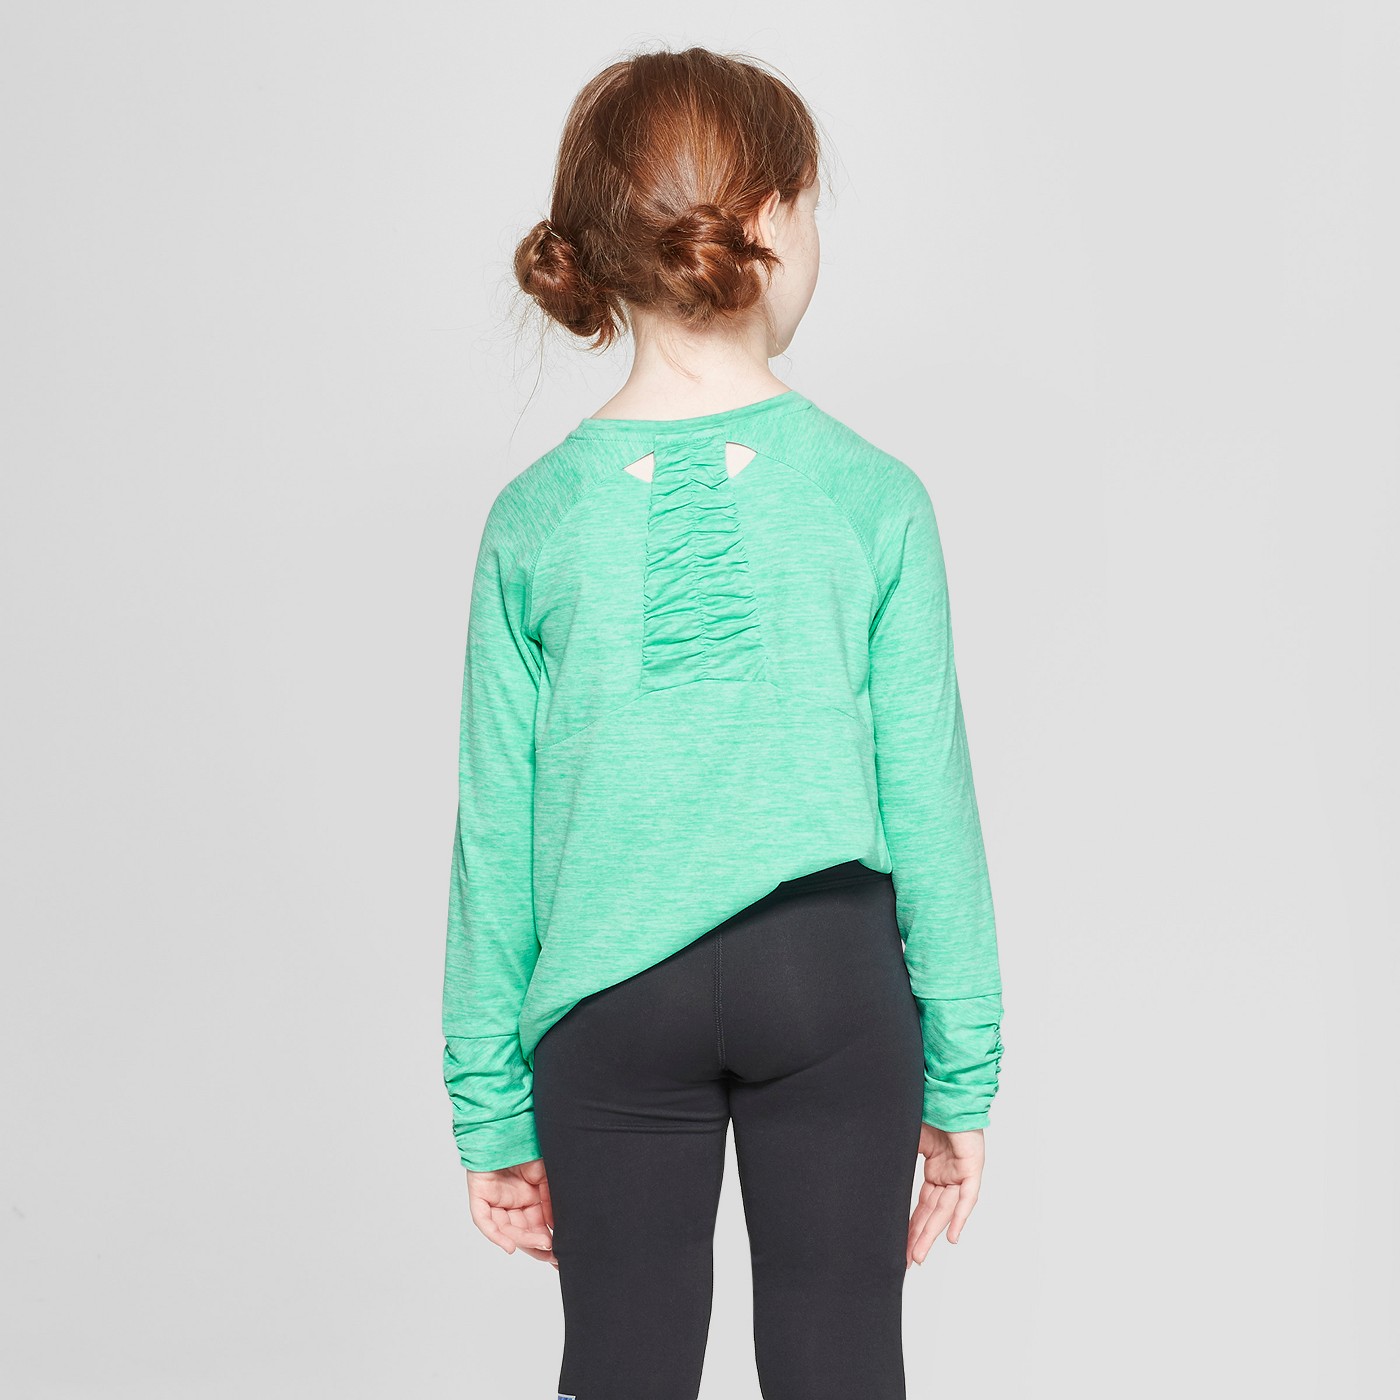 Girls' Ruched Super Soft Long Sleeve T-Shirt - C9 ChampionÂ® - image 2 of 3